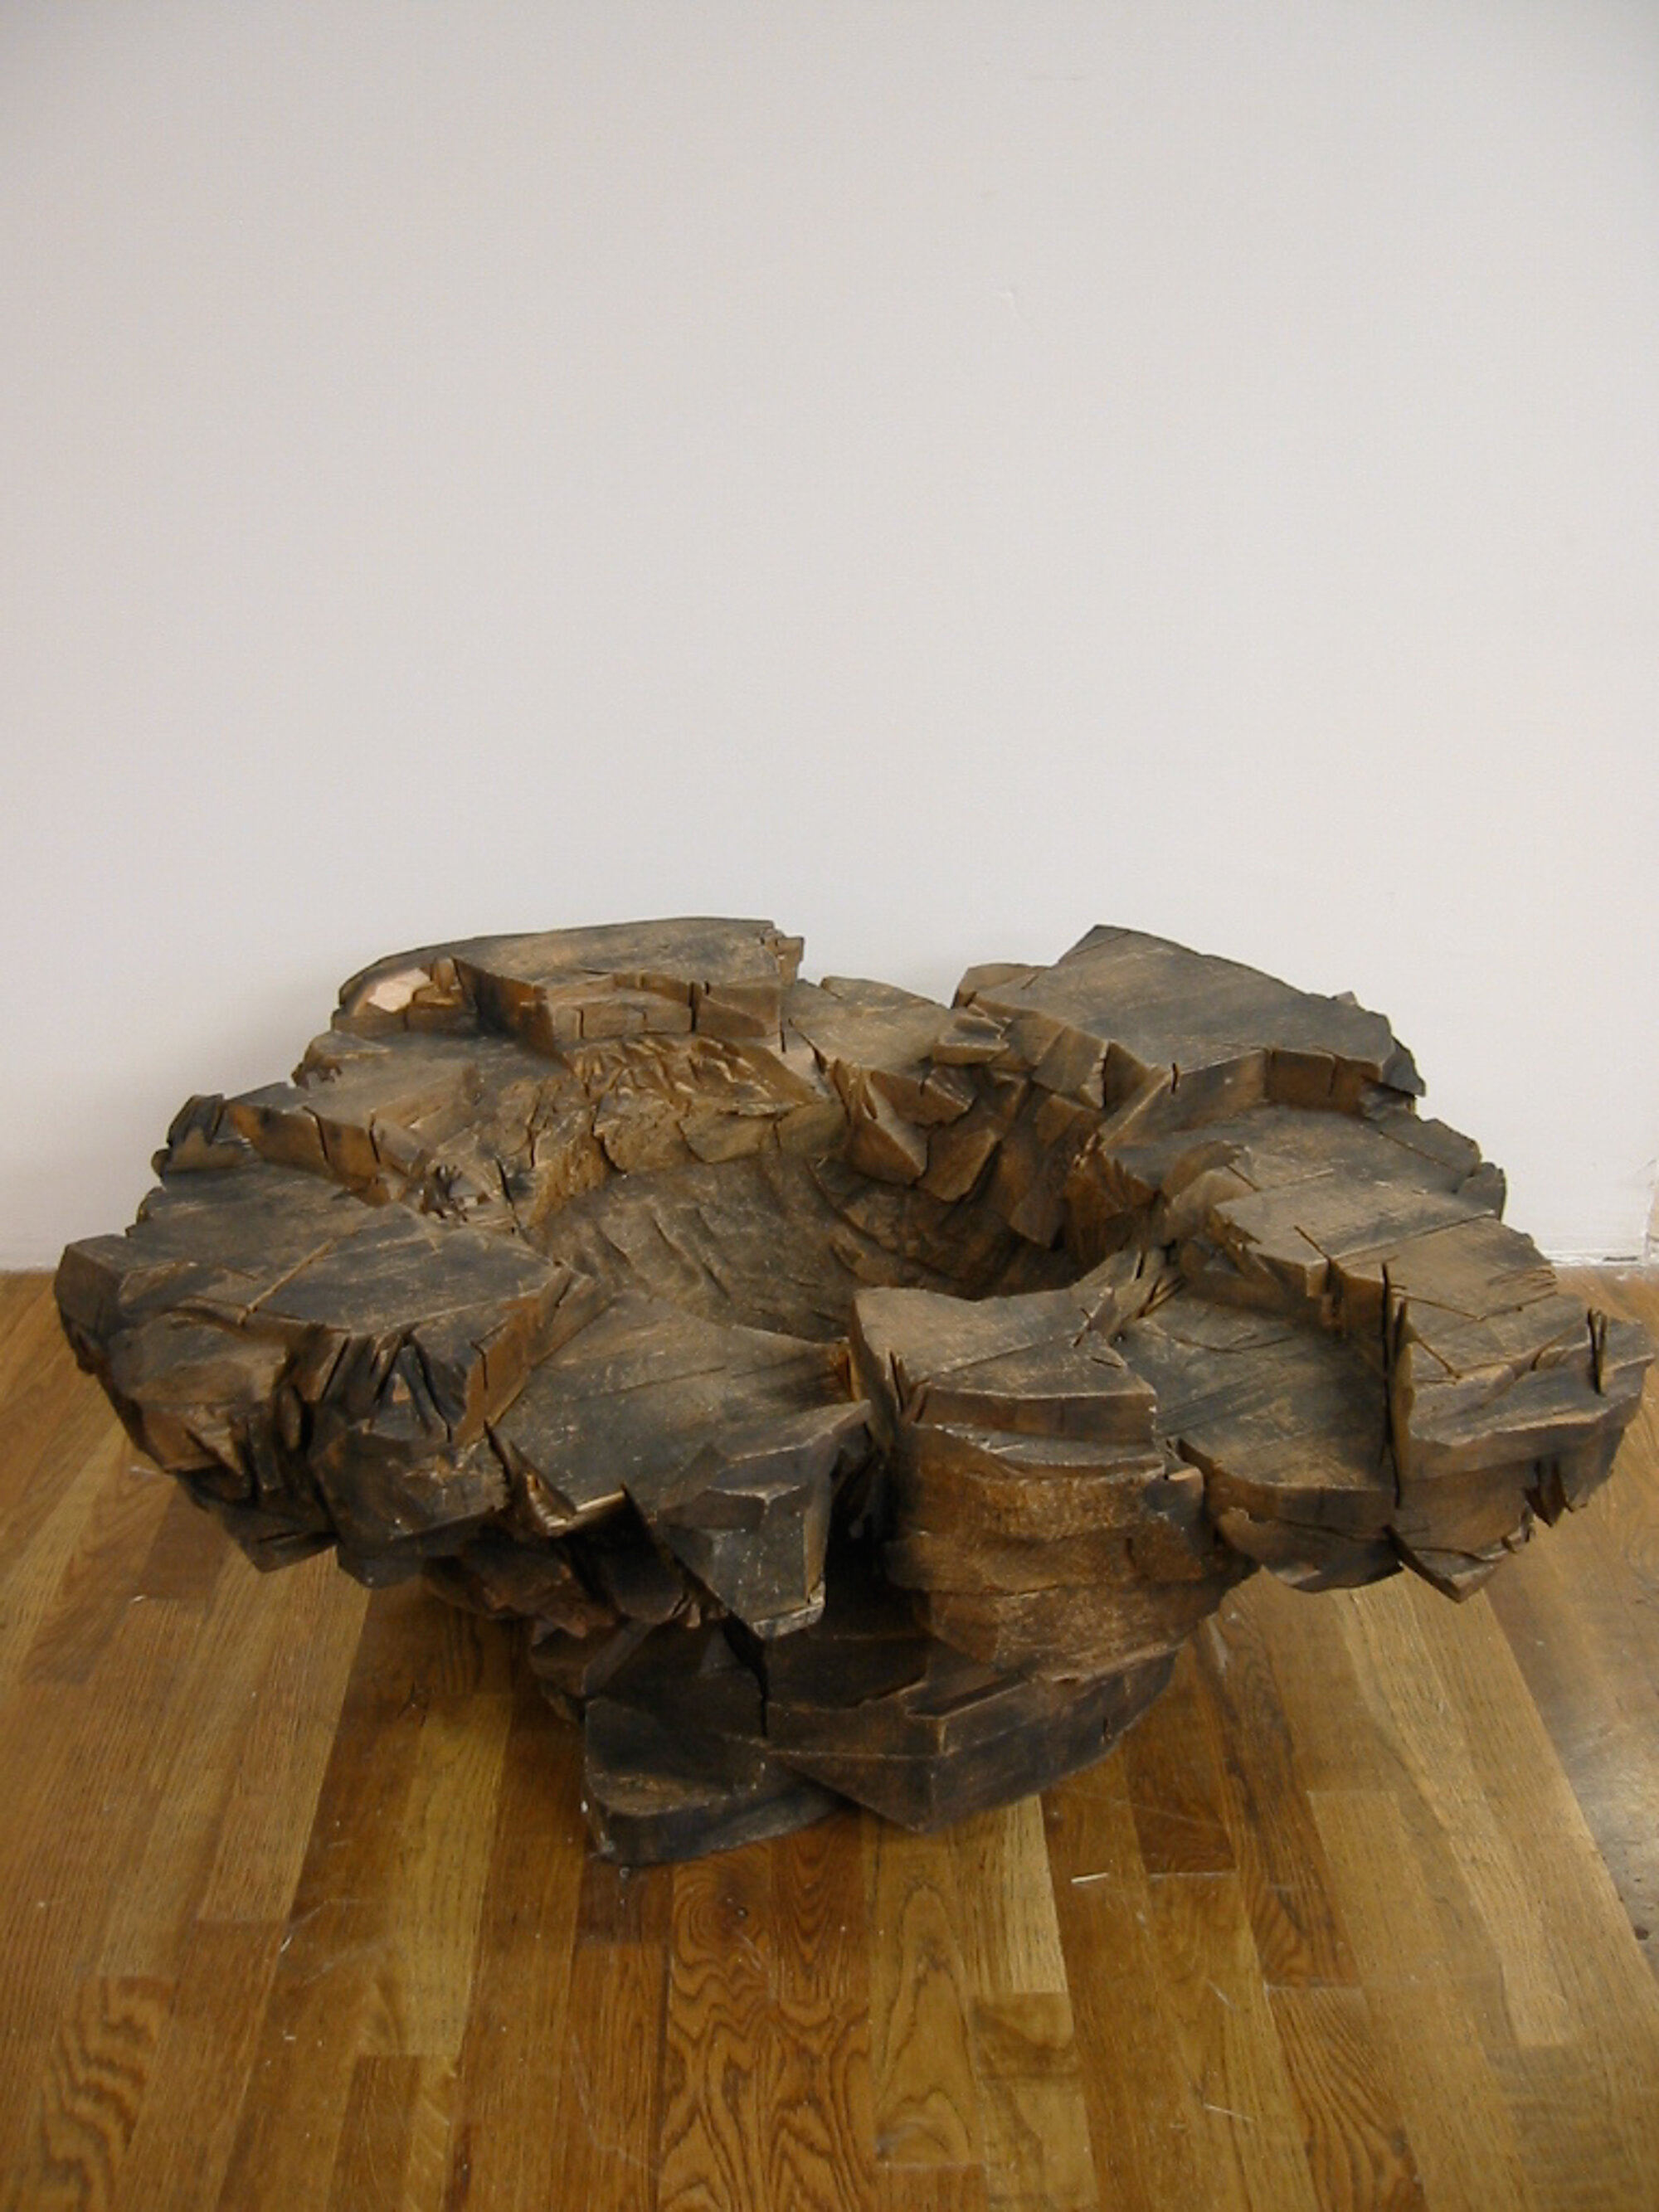       Untitled (Little Bowl II) , 1999 Cedar and graphite 15.5 x 36 x 38 in. 